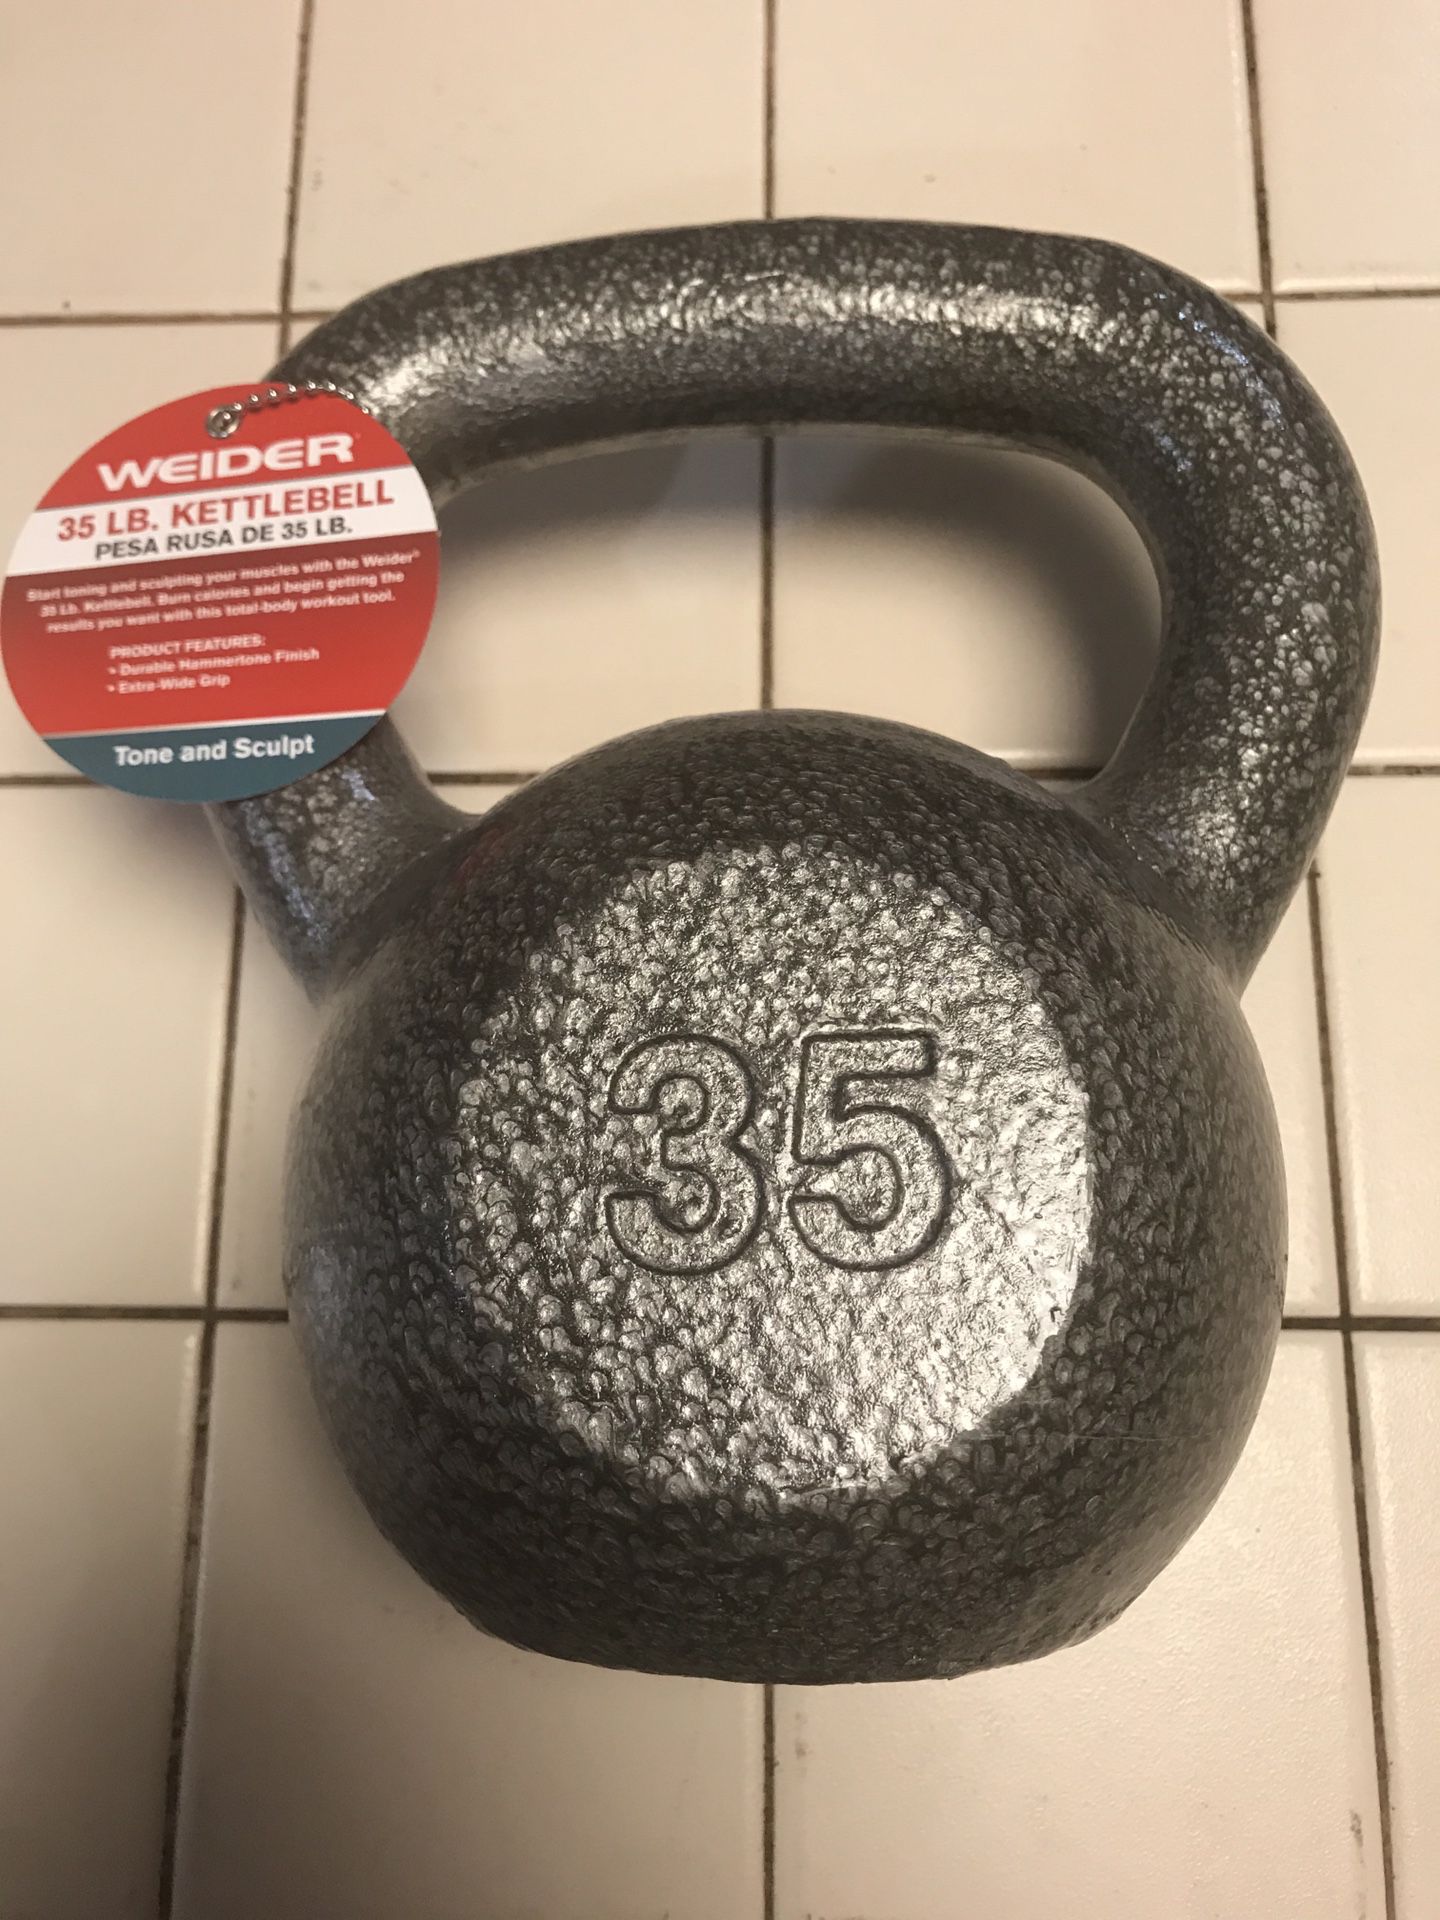 New never used 35 LBS